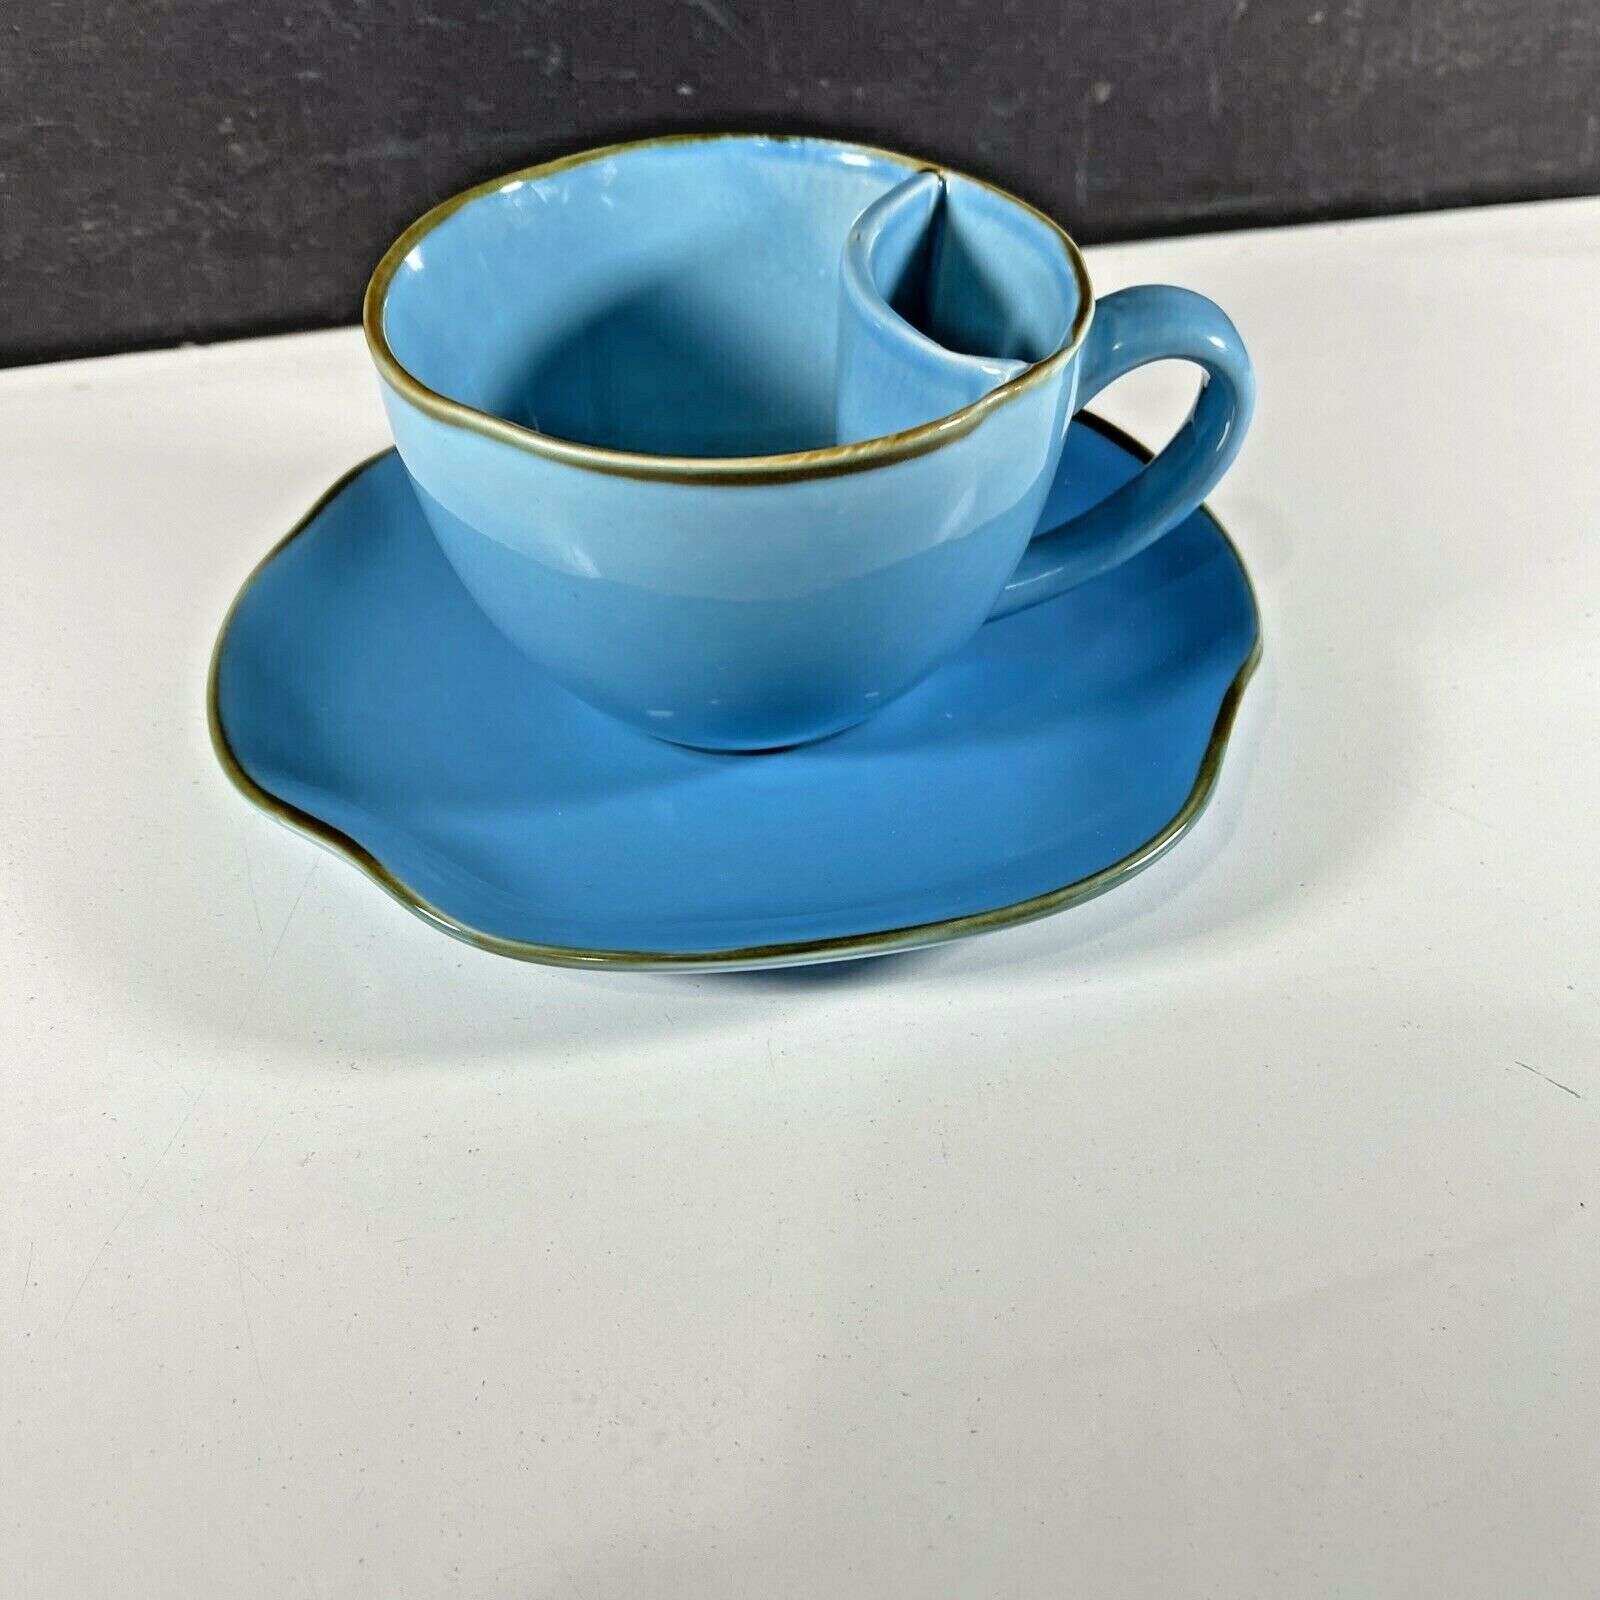 All'asta Vintage Tea Cup with Attached Tea Bag Holder & Matching Saucer